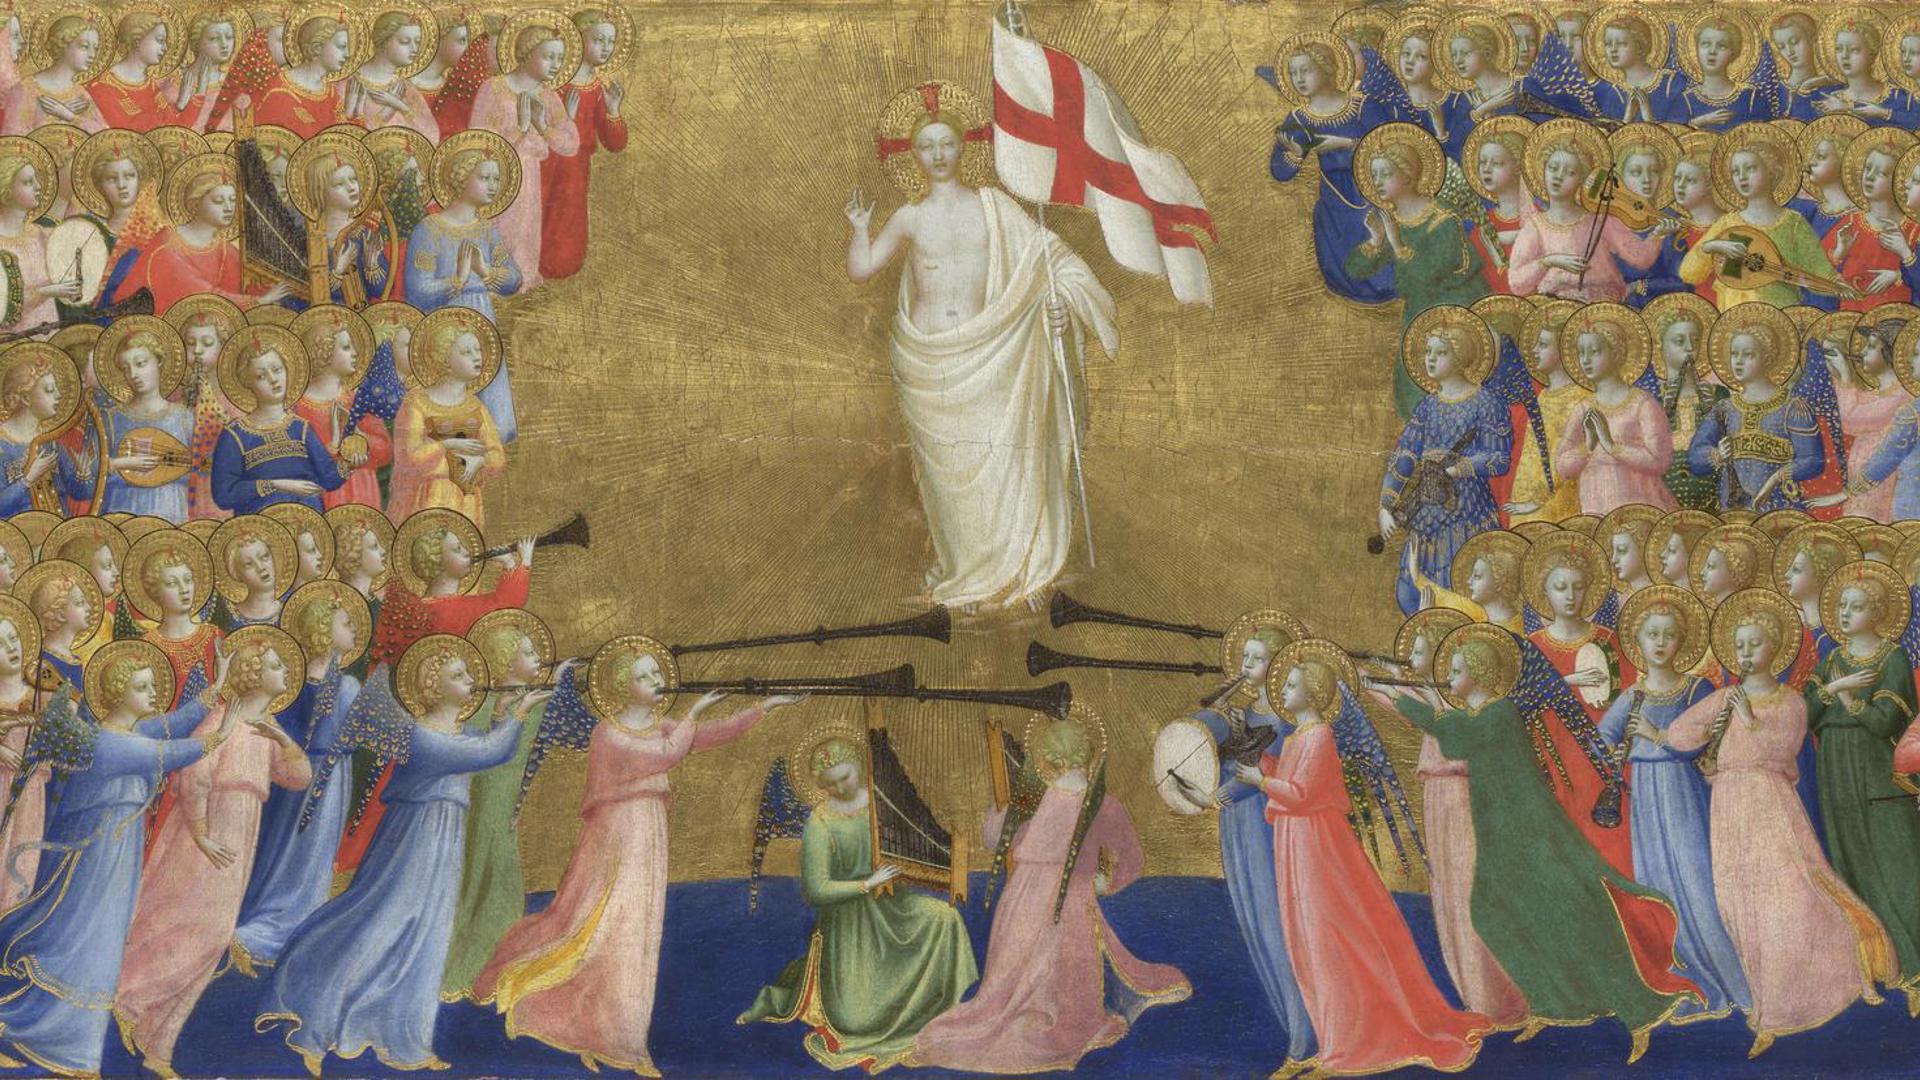 Christ Glorified in the Court of Heaven by Fra Angelico